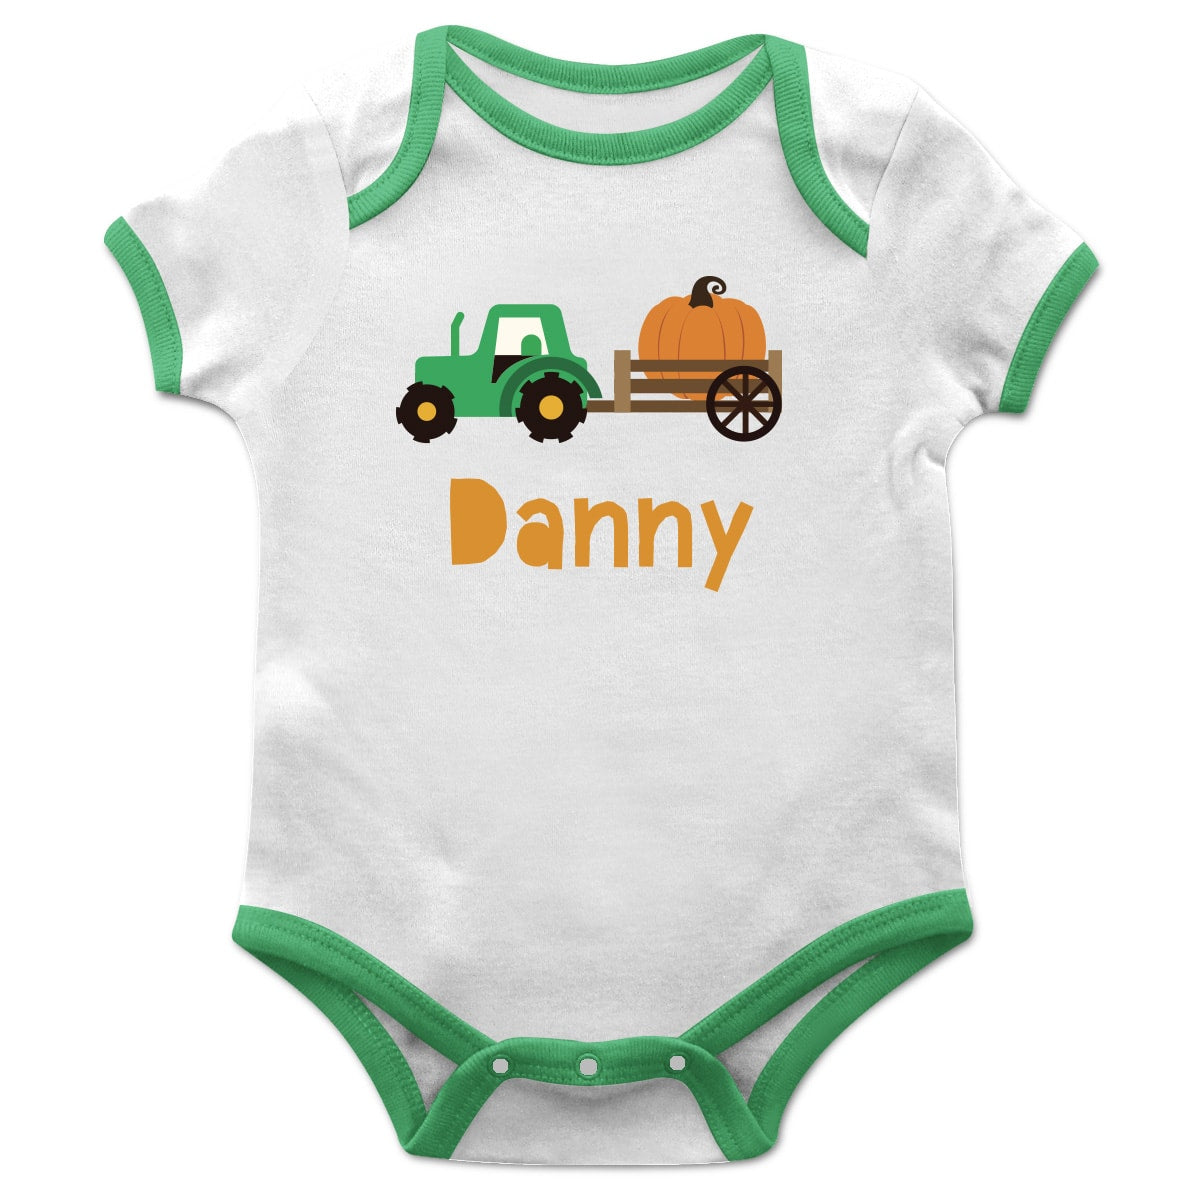 Boys white and green pumpkins onesie with name - Wimziy&Co.